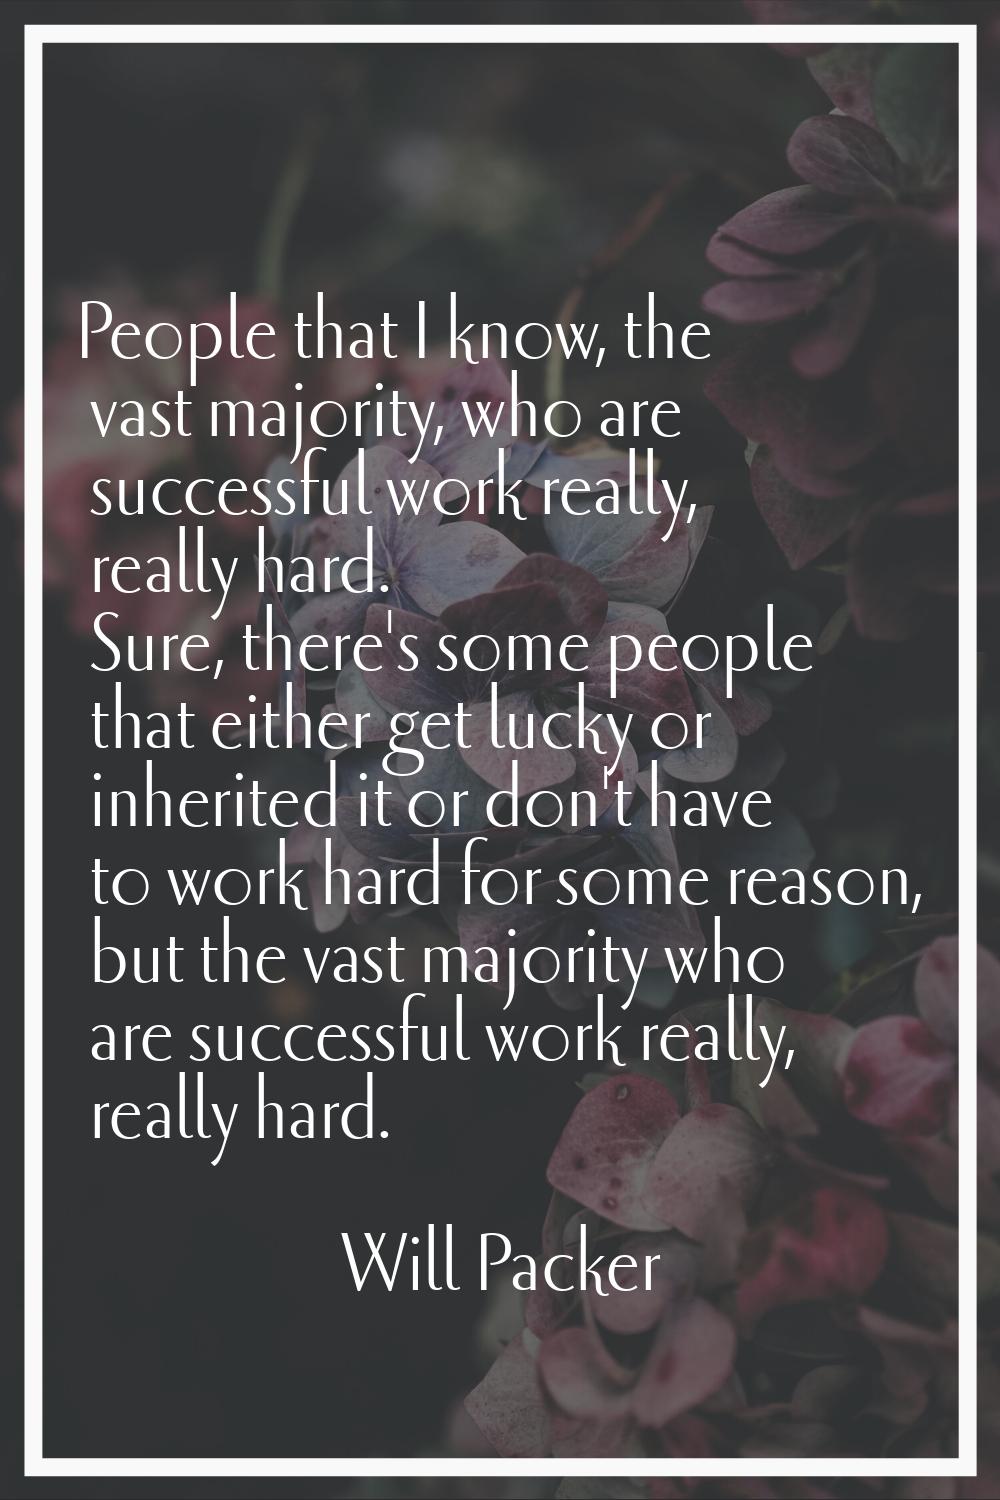 People that I know, the vast majority, who are successful work really, really hard. Sure, there's s